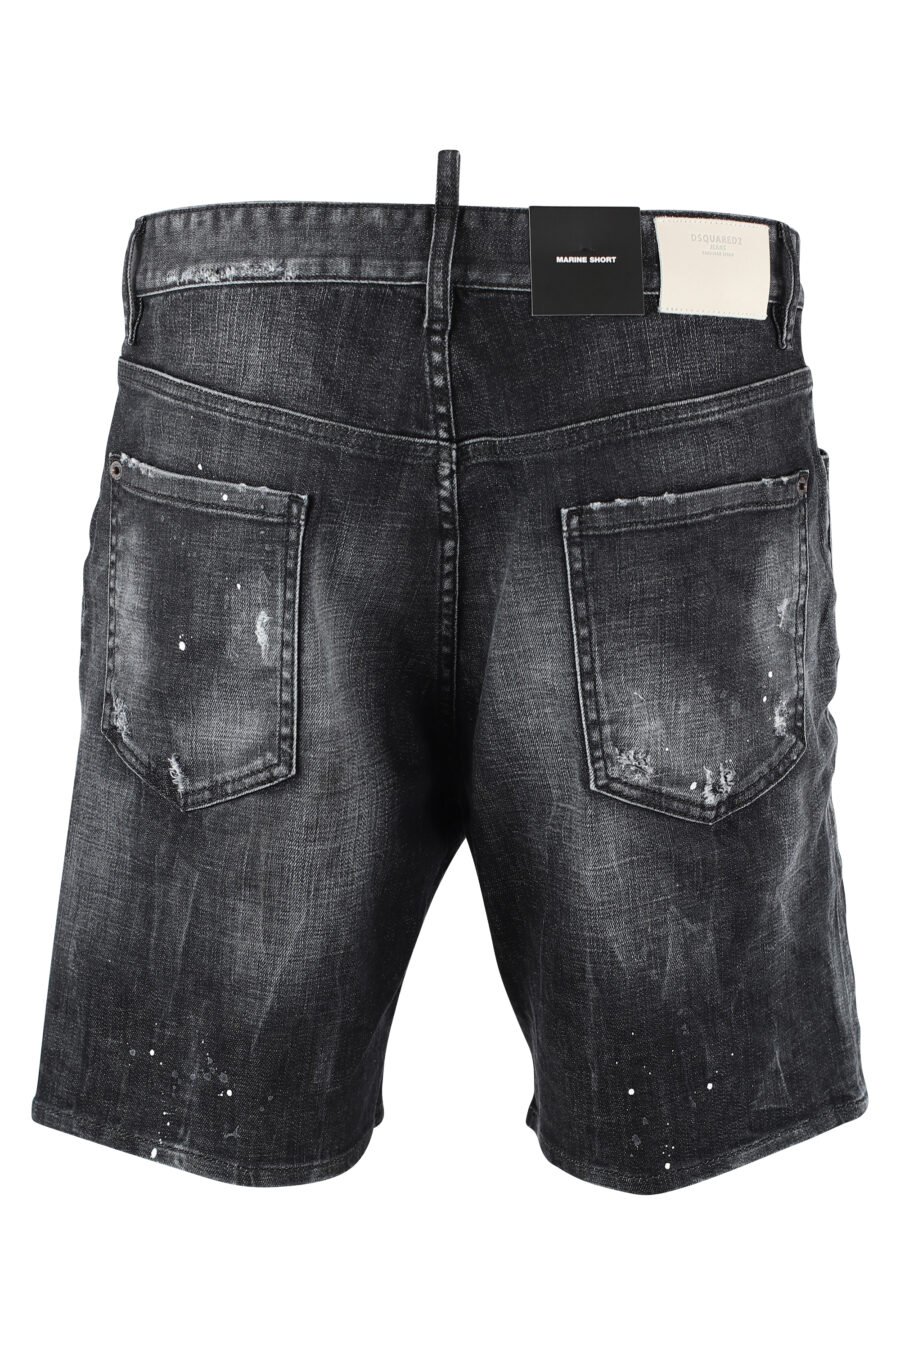 Marine denim shorts black worn out with rips - IMG 9730